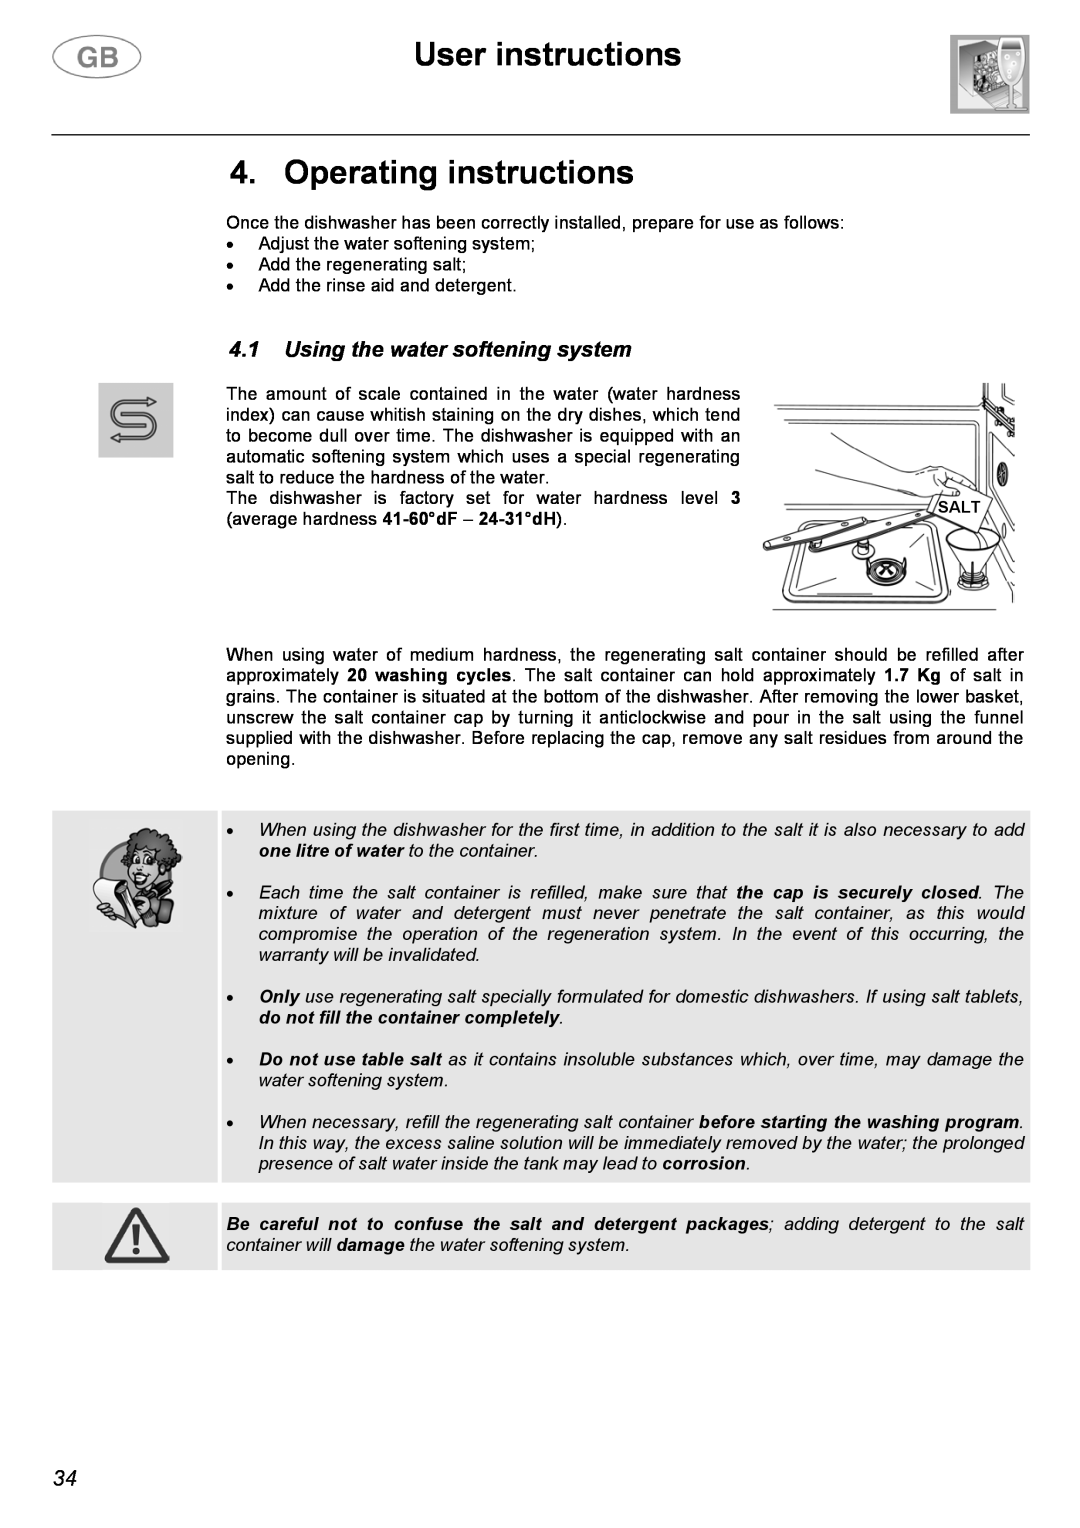 Smeg EL05 instruction manual User instructions 4. Operating instructions, 4.1Using the water softening system 